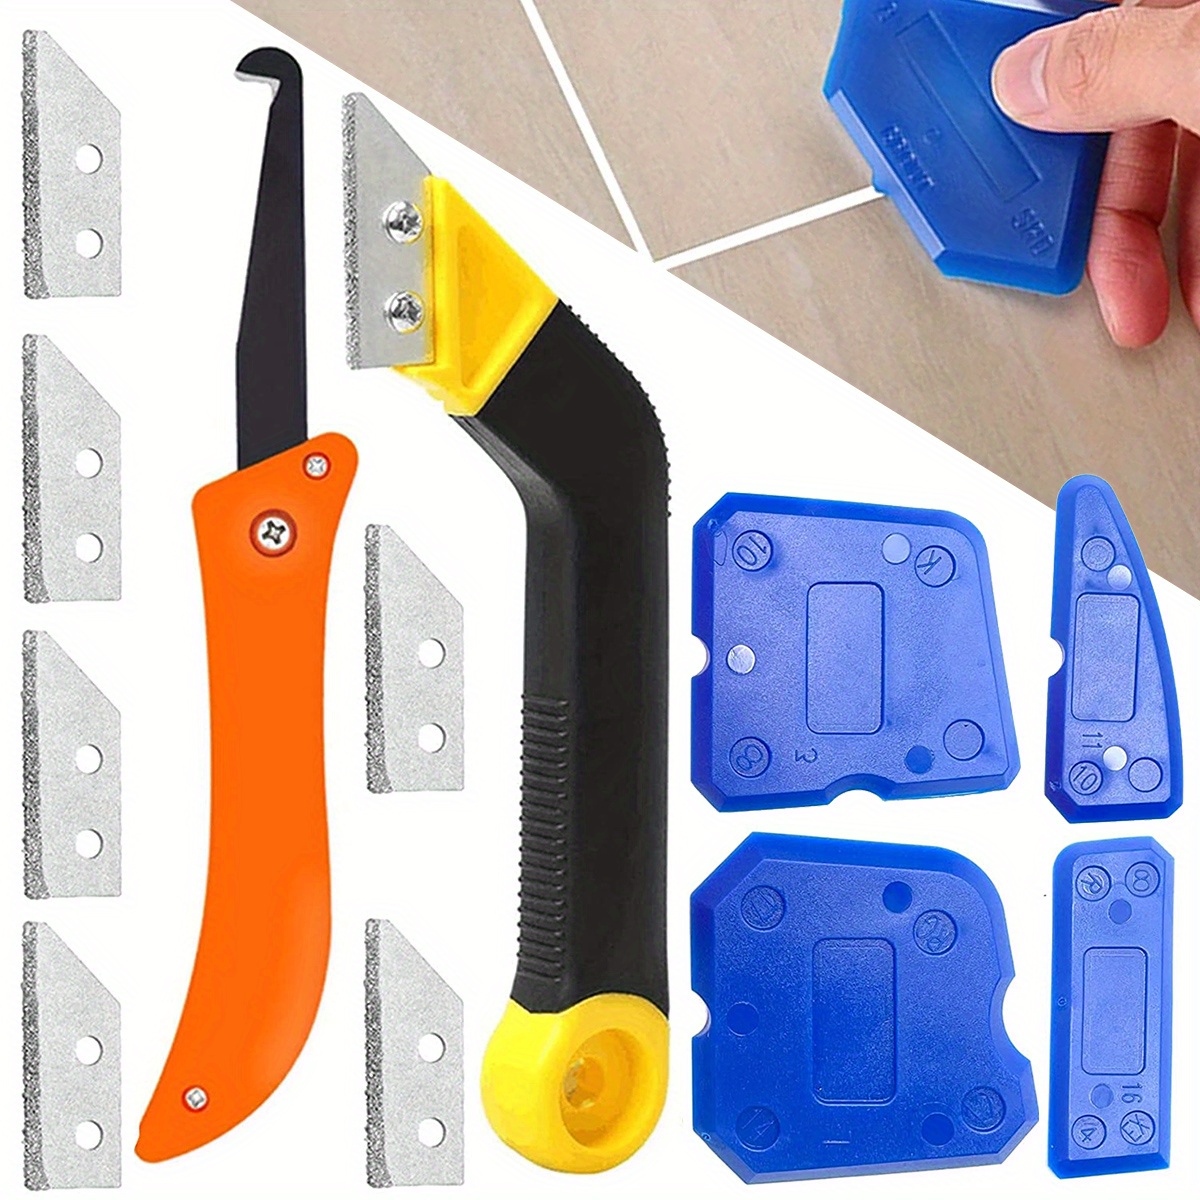 Grout Removal Tool Silicone Removal Sealant Grout Kit 8 In 1 Caulk Remover  Tool Grout Saw Scraper For Tub Siding Sink Shower - AliExpress